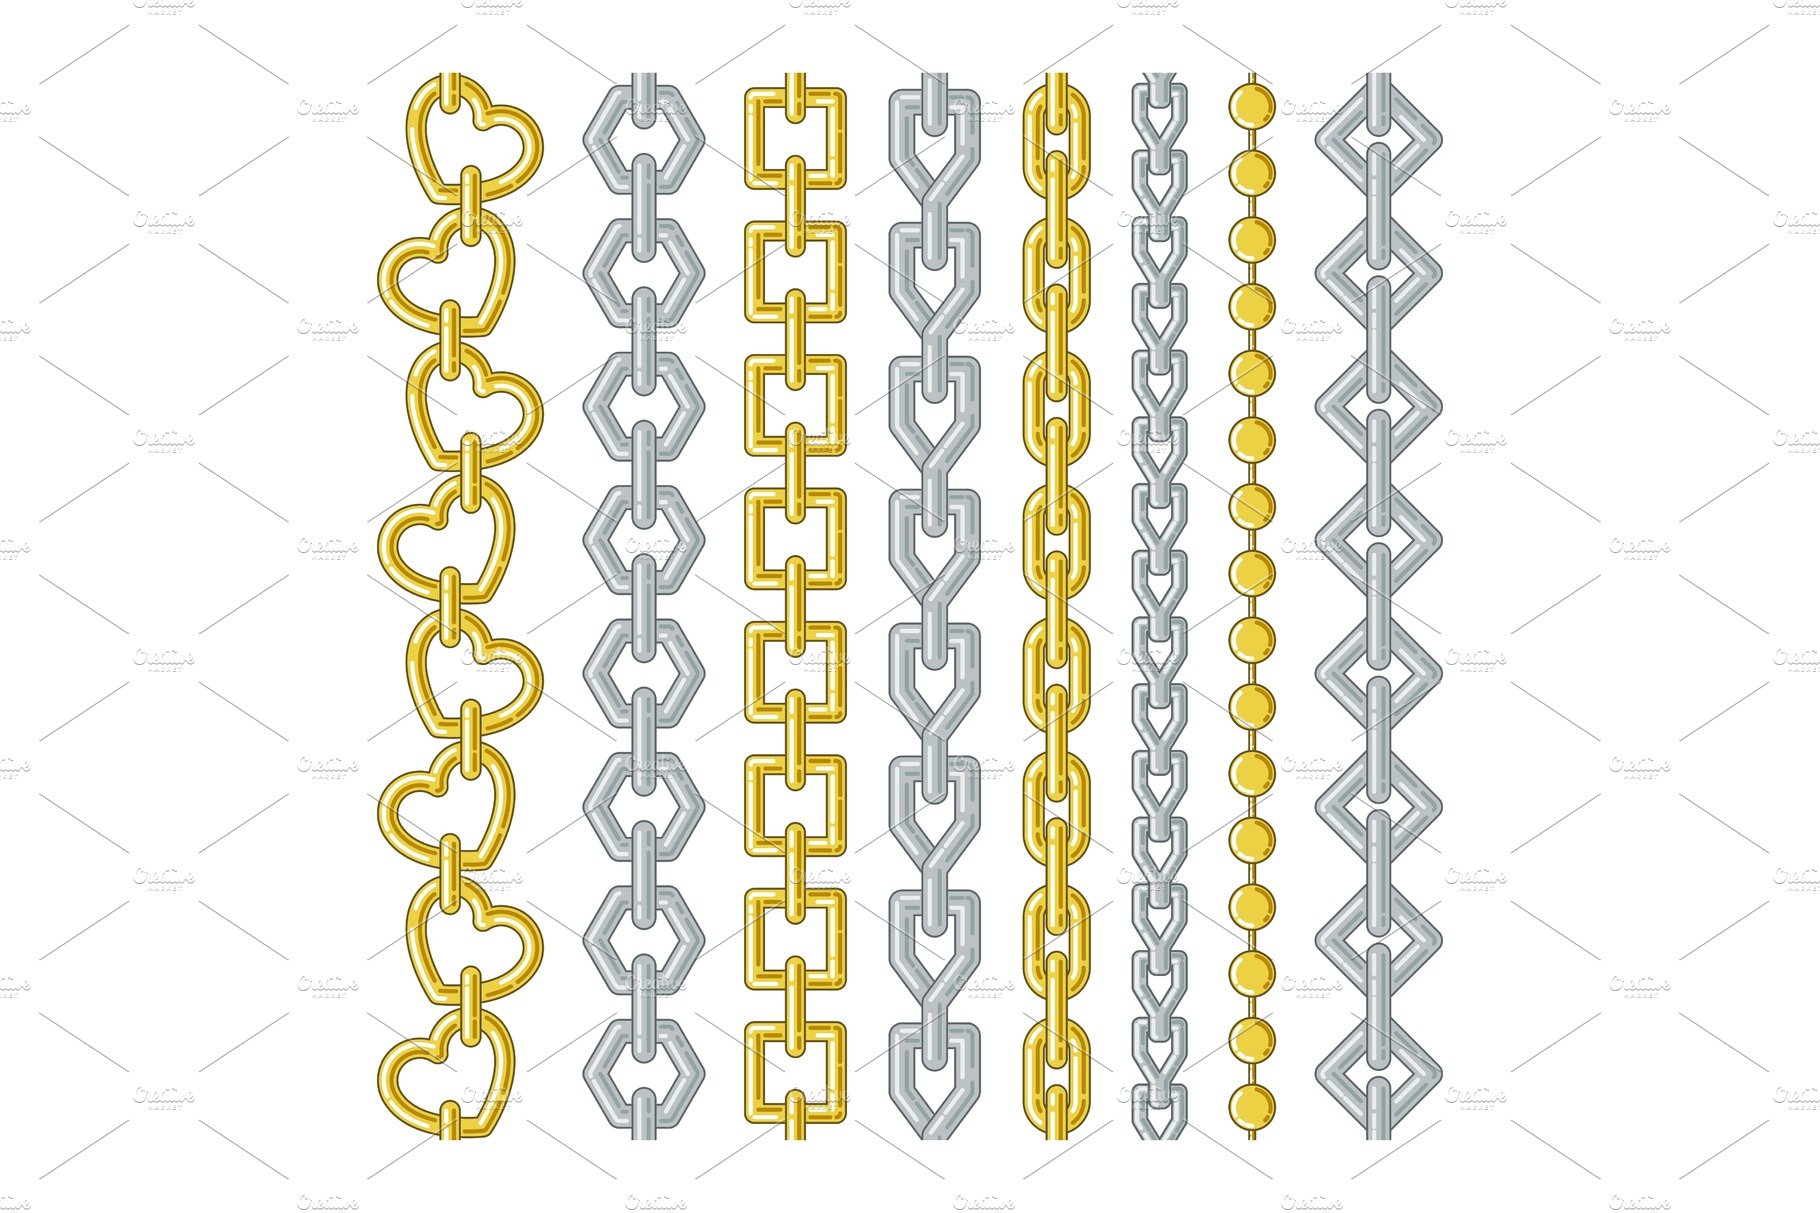 Gold and silver chains. Vector collection set isolate on white cover image.